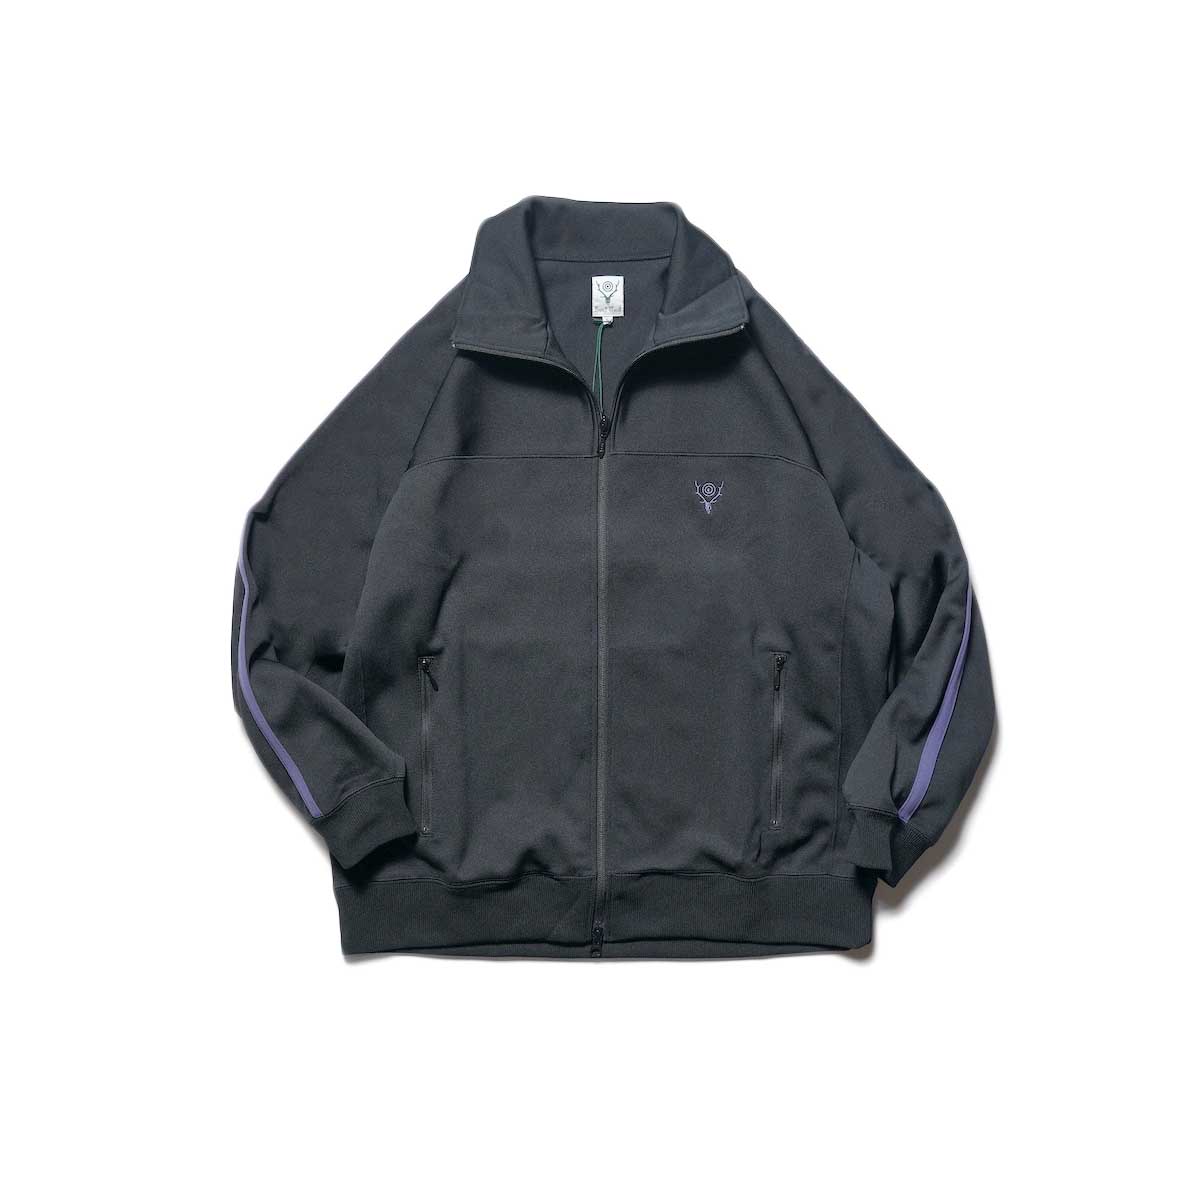 South2 West8 / Trainer Jacket - Poly Smooth (Black)